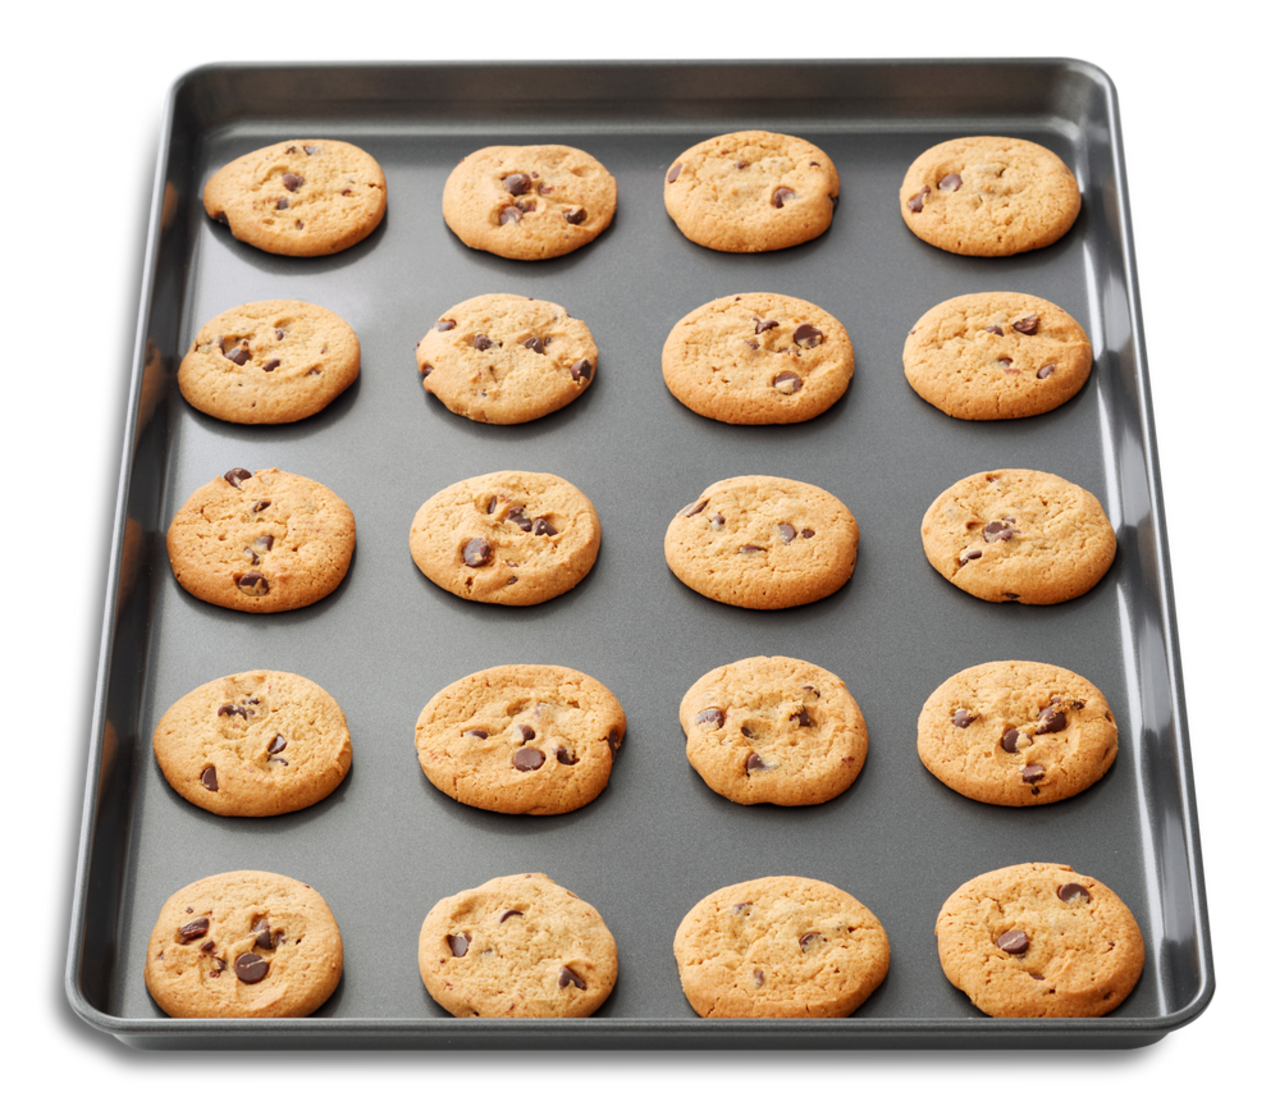 https://media-www.canadiantire.ca/product/living/kitchen/bakeware-baking-prep/1429065/wilton-mega-21-cookie-pan-bc1bf9c6-5d3e-4a79-9cc4-6f705d448865.png?imdensity=1&imwidth=1244&impolicy=mZoom